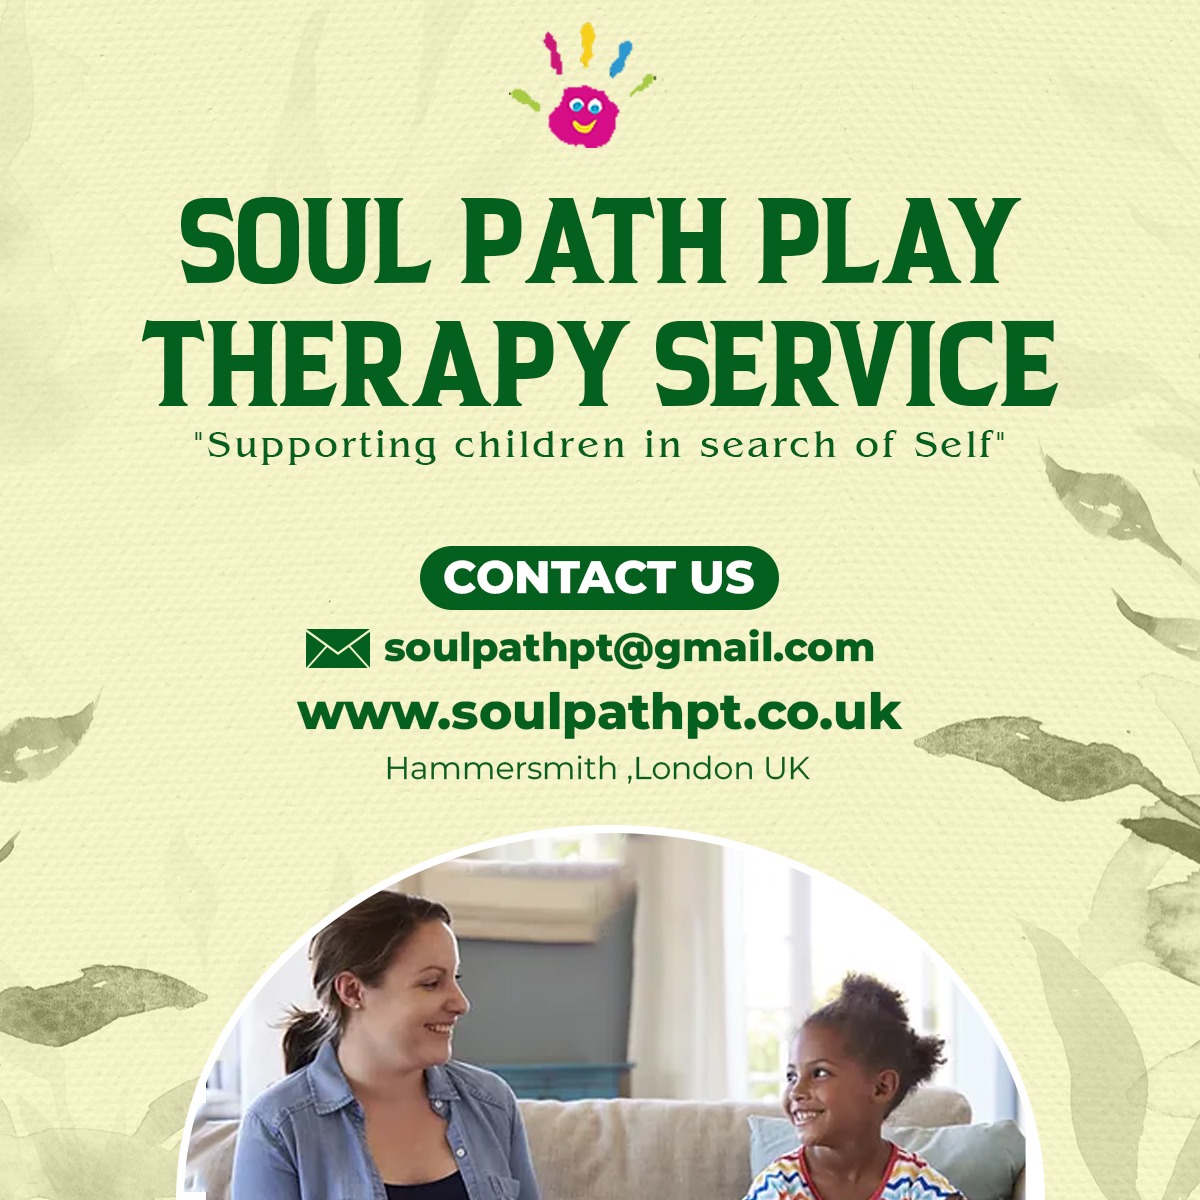 soul path play therapy service